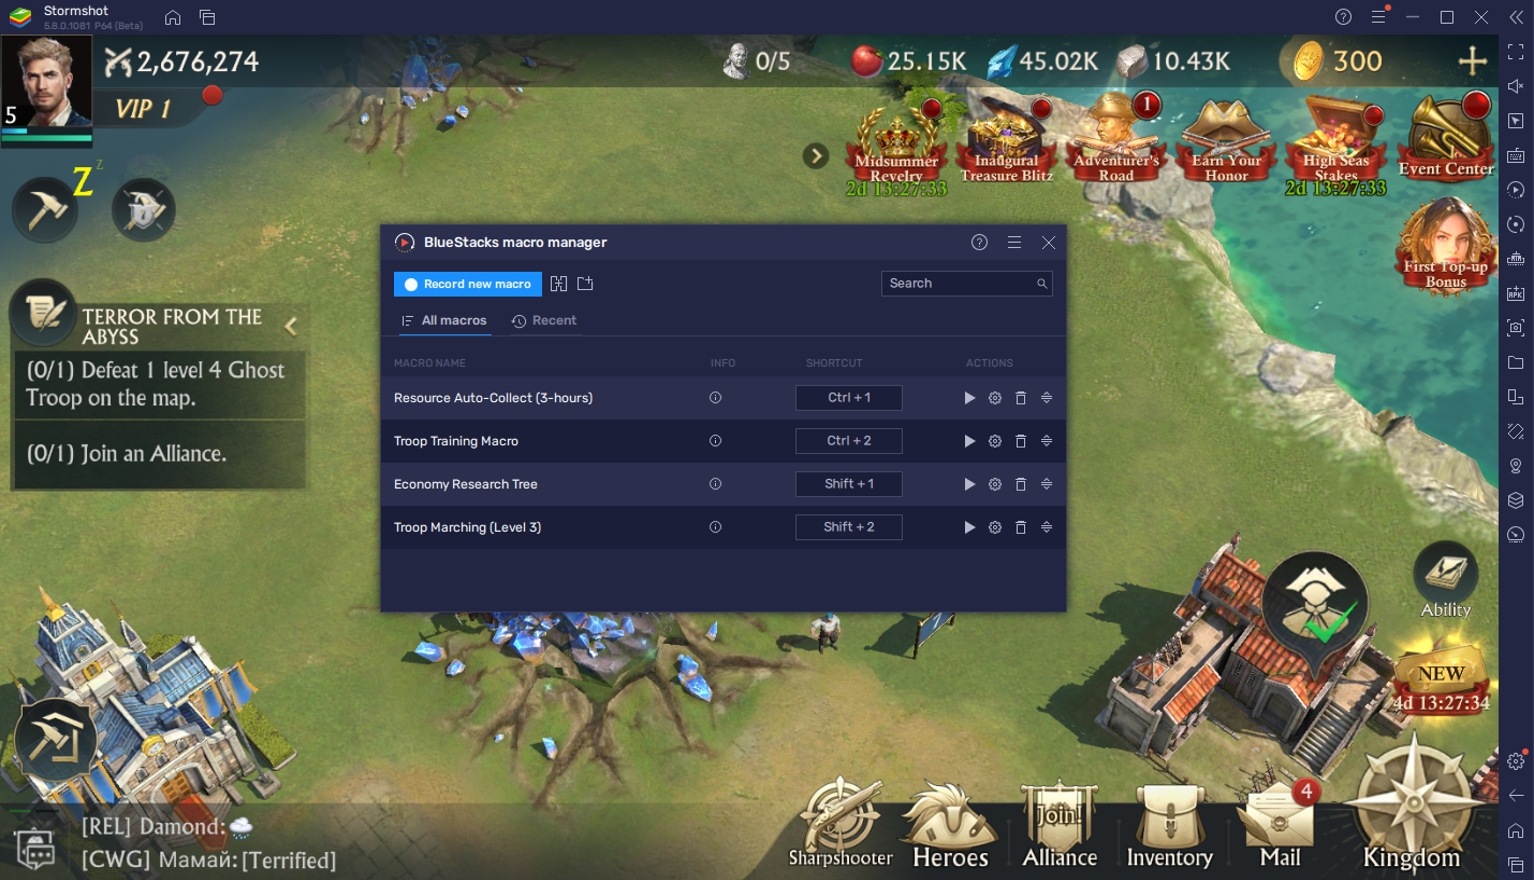 How to Play Stormshot: Isle of Adventure on PC with BlueStacks